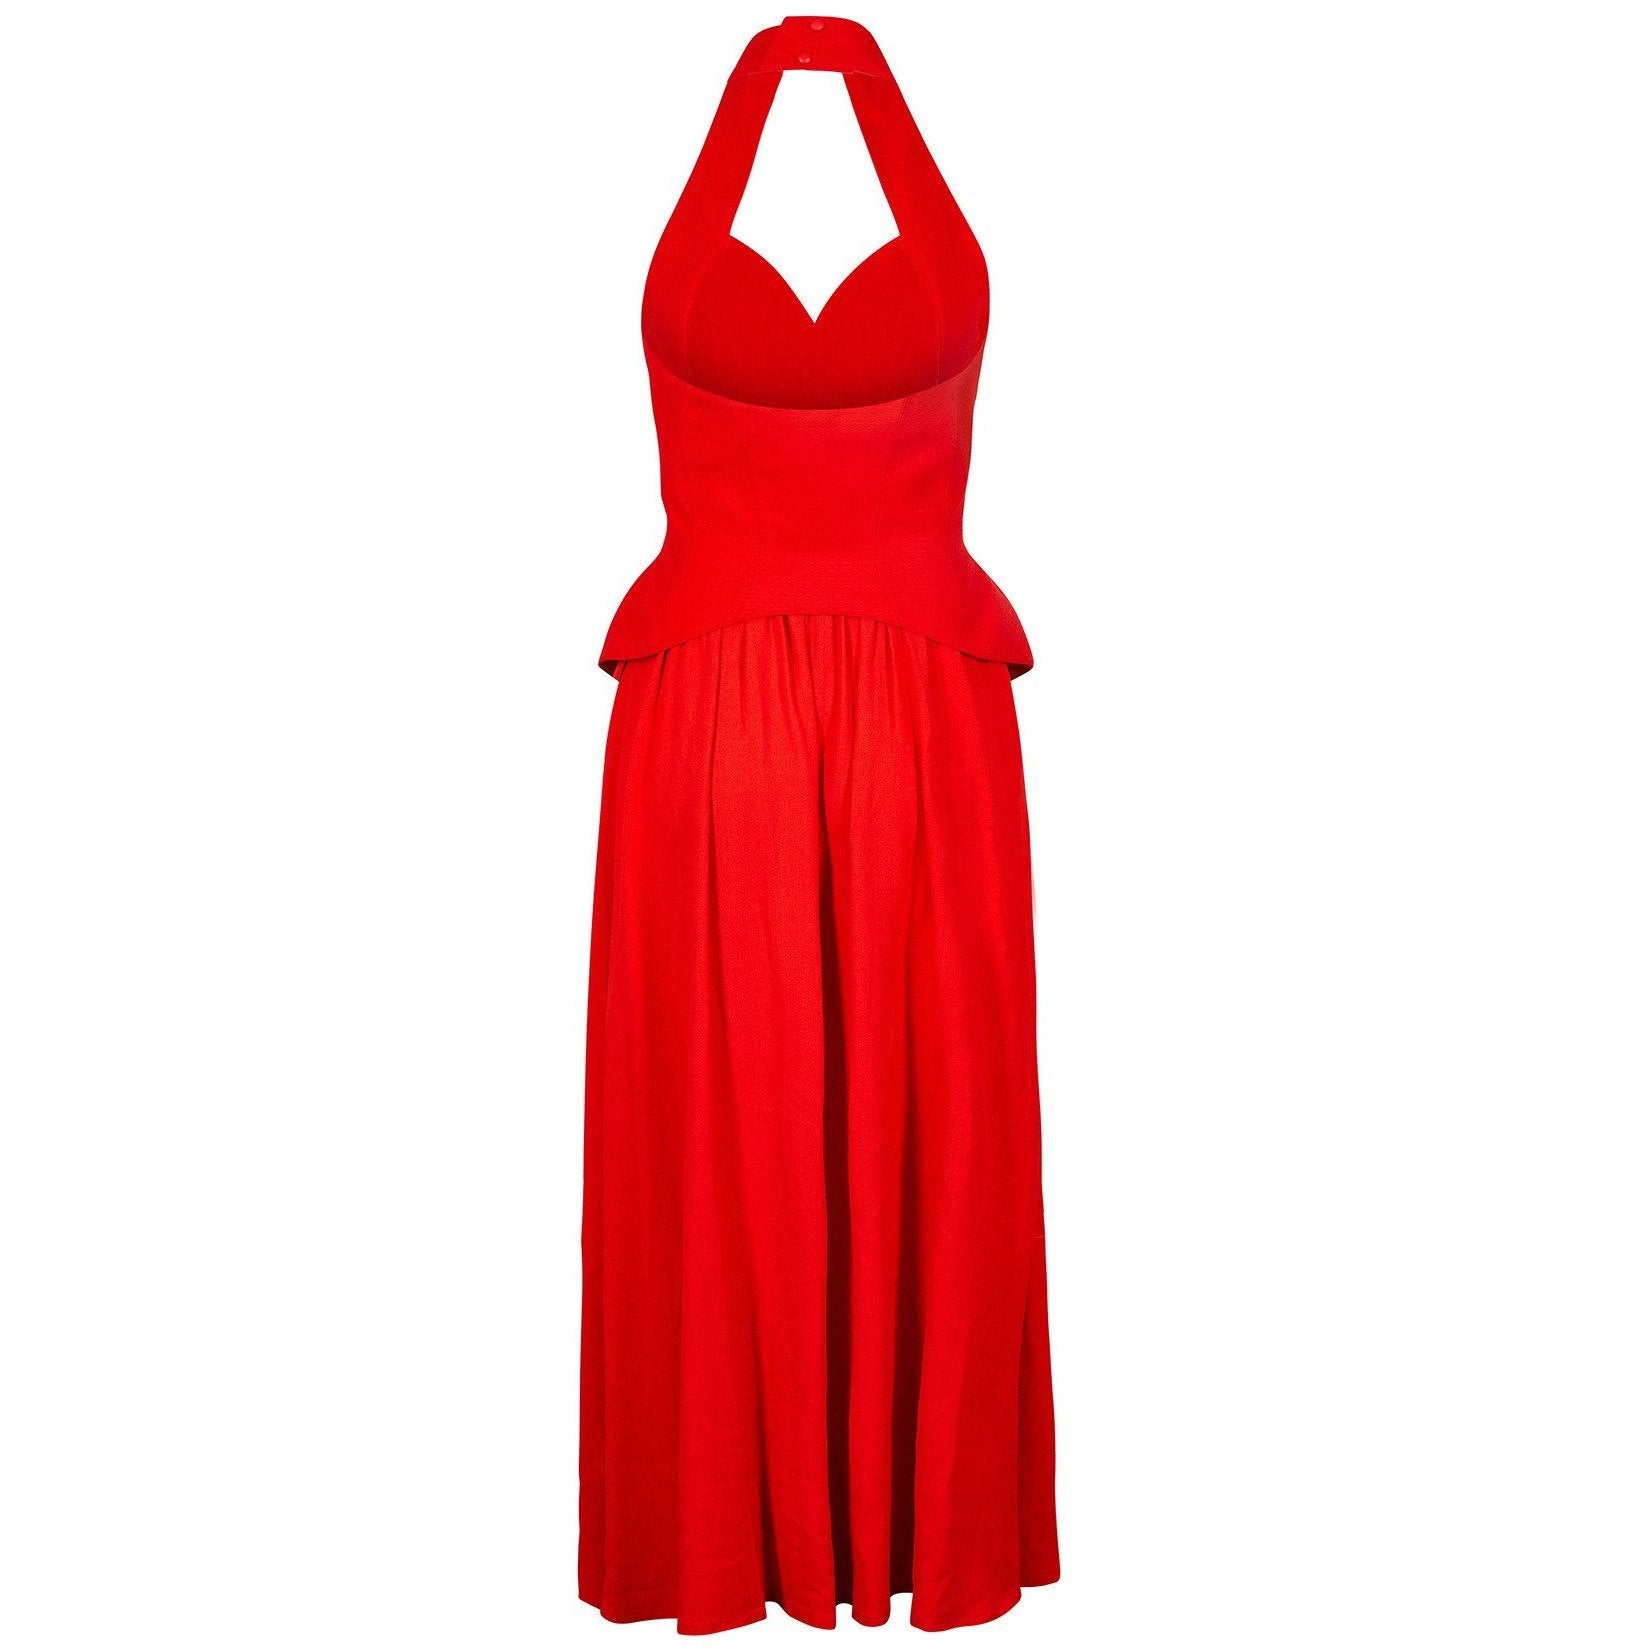 1990s Thierry Mugler Couture Halter Neck Red Dress– CIRCA VINTAGE LONDON